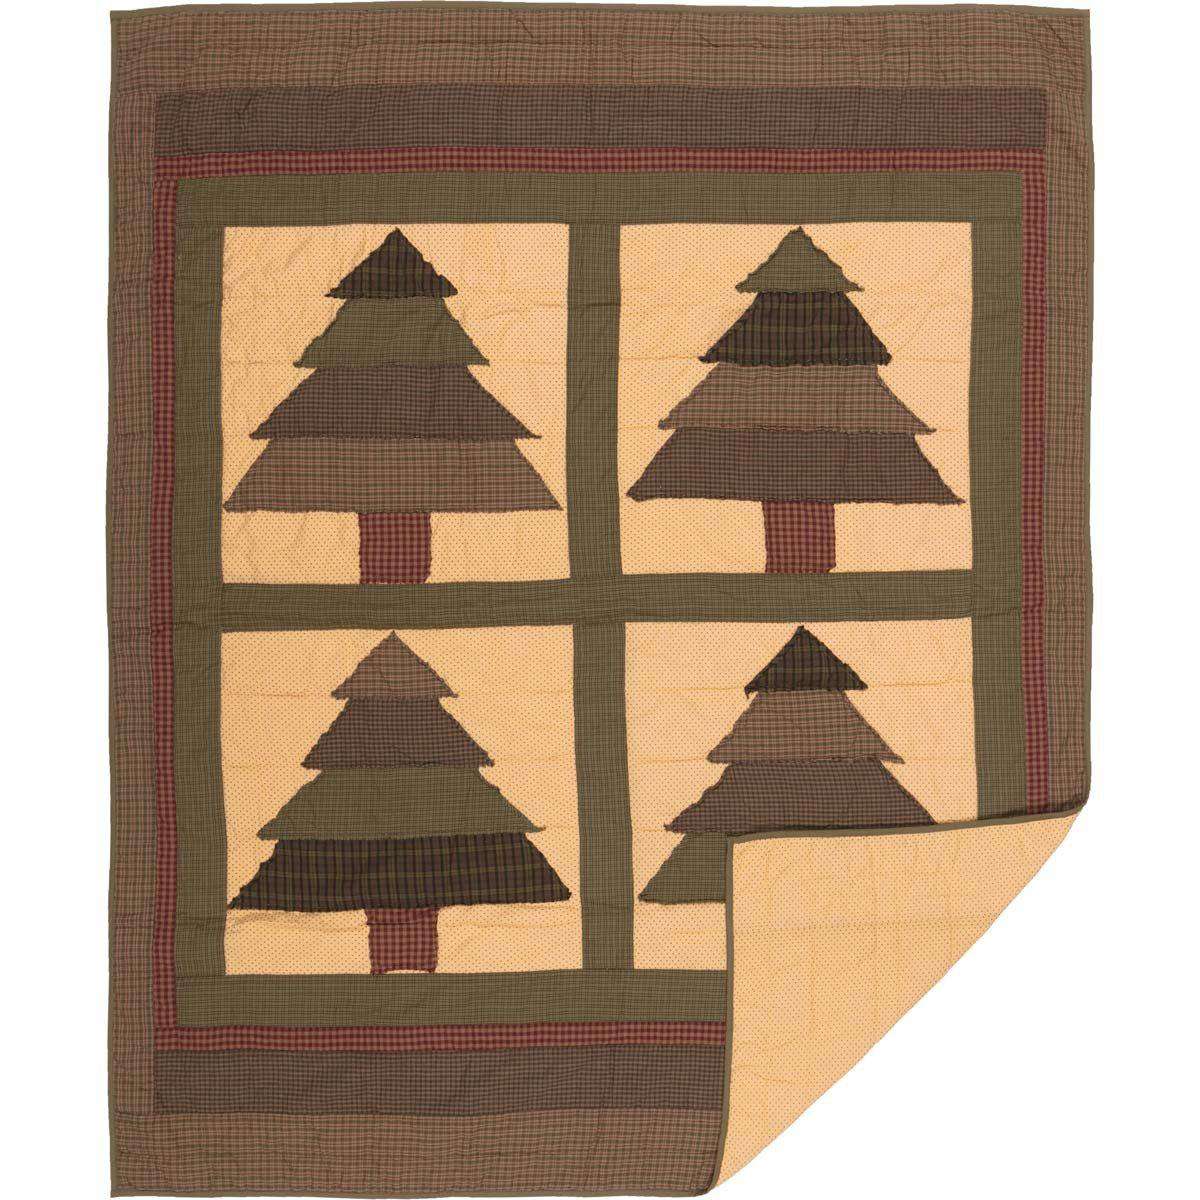 Sequoia Quilted Throw 60" x 50" VHC Brands - The Fox Decor